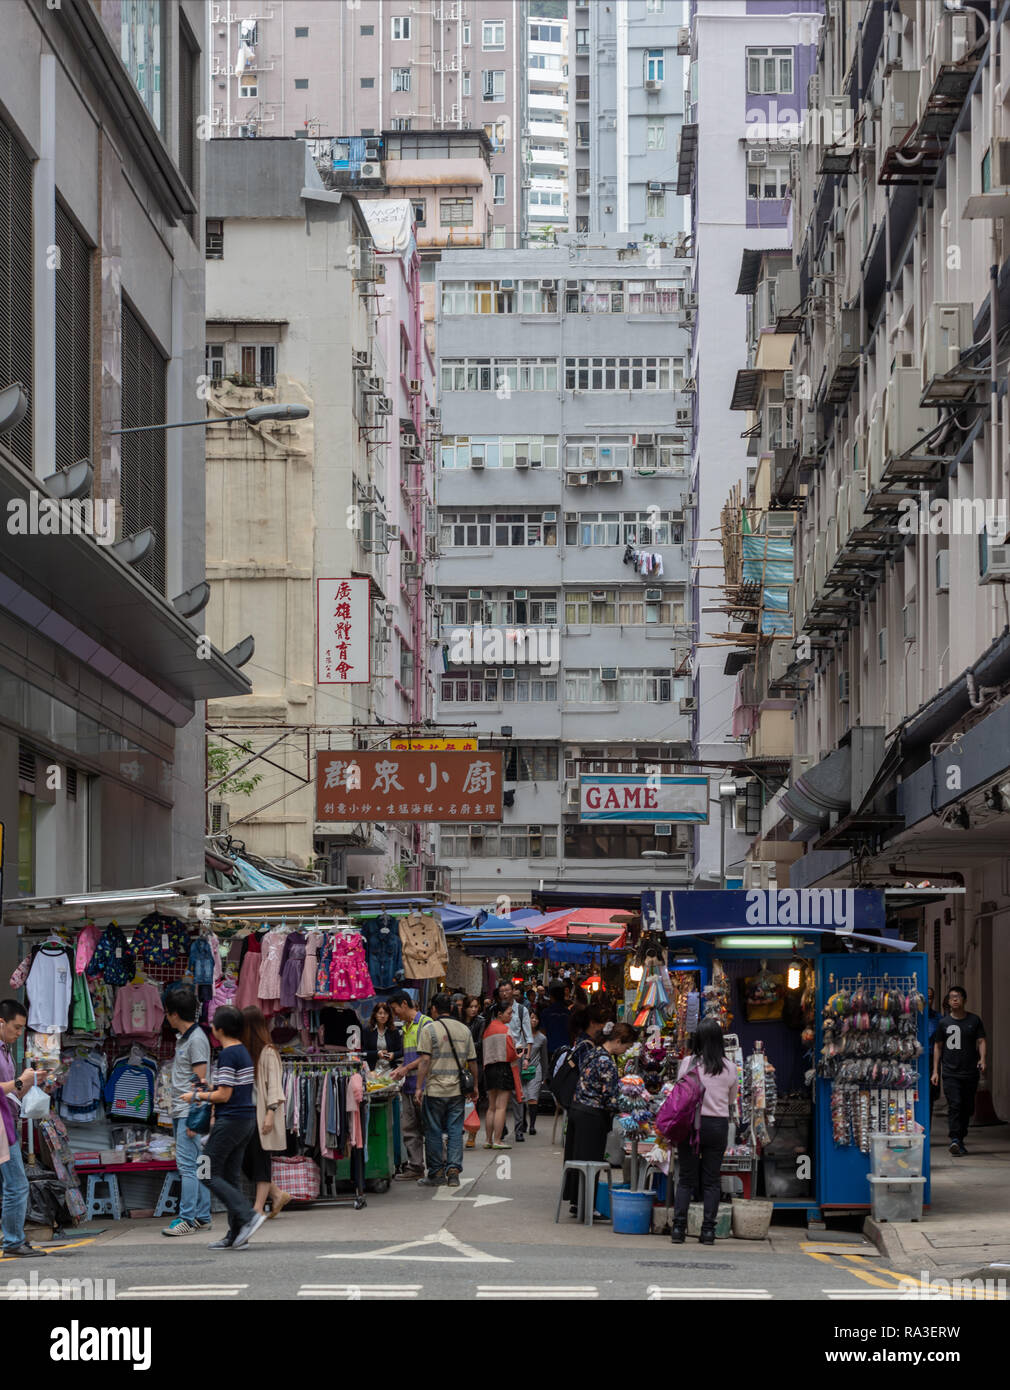 One of the many colourful local markets that fill the small side streets and alley ways of Hong Kong's Wan Chai district. Stock Photo